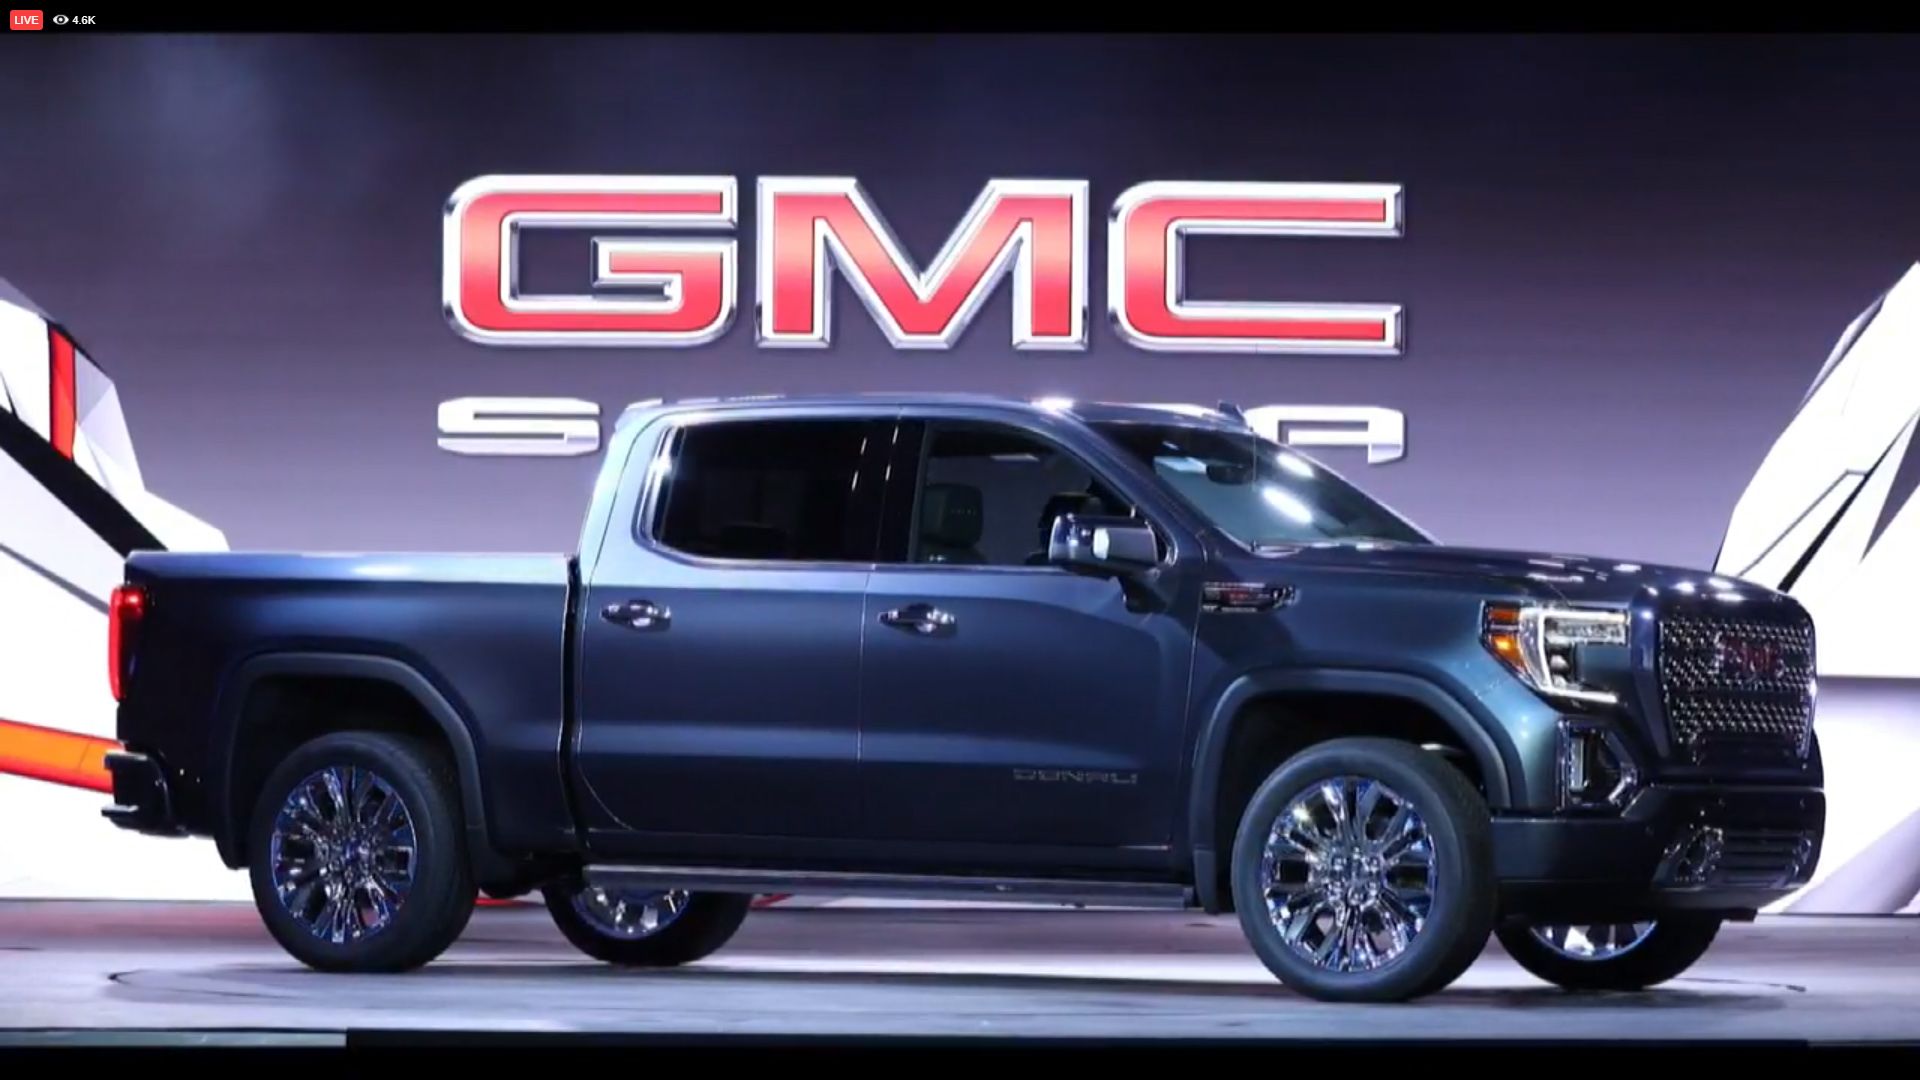 2018 GMC Debuts The 2019 Sierra, Goes Upscale And High-Tech